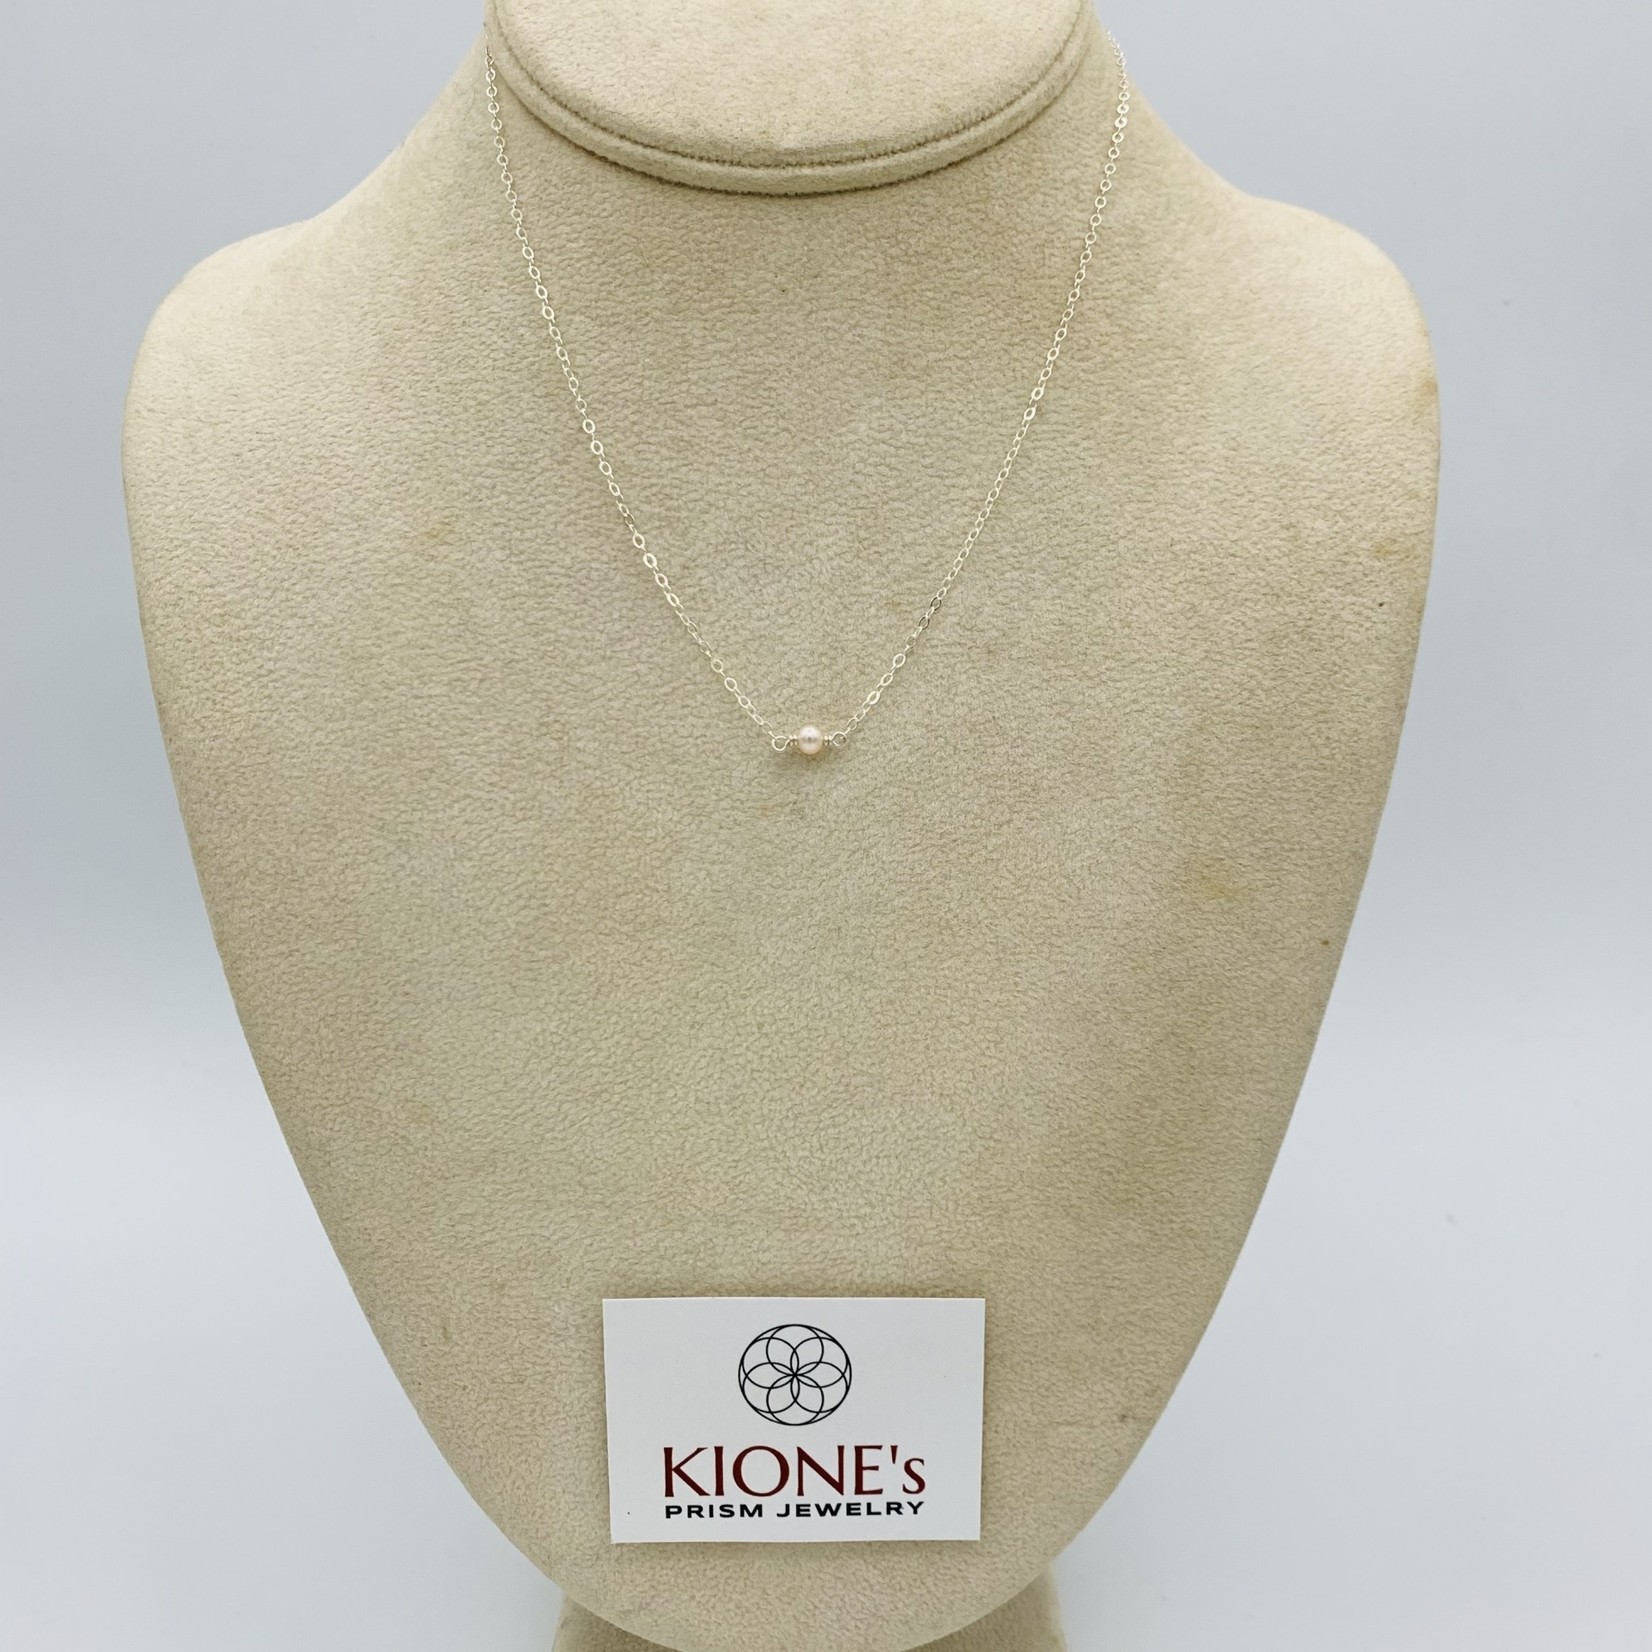 Kione’s Prism Jewelry Solitaire Pink Fresh Water Pearl on Sterling Silver Necklace